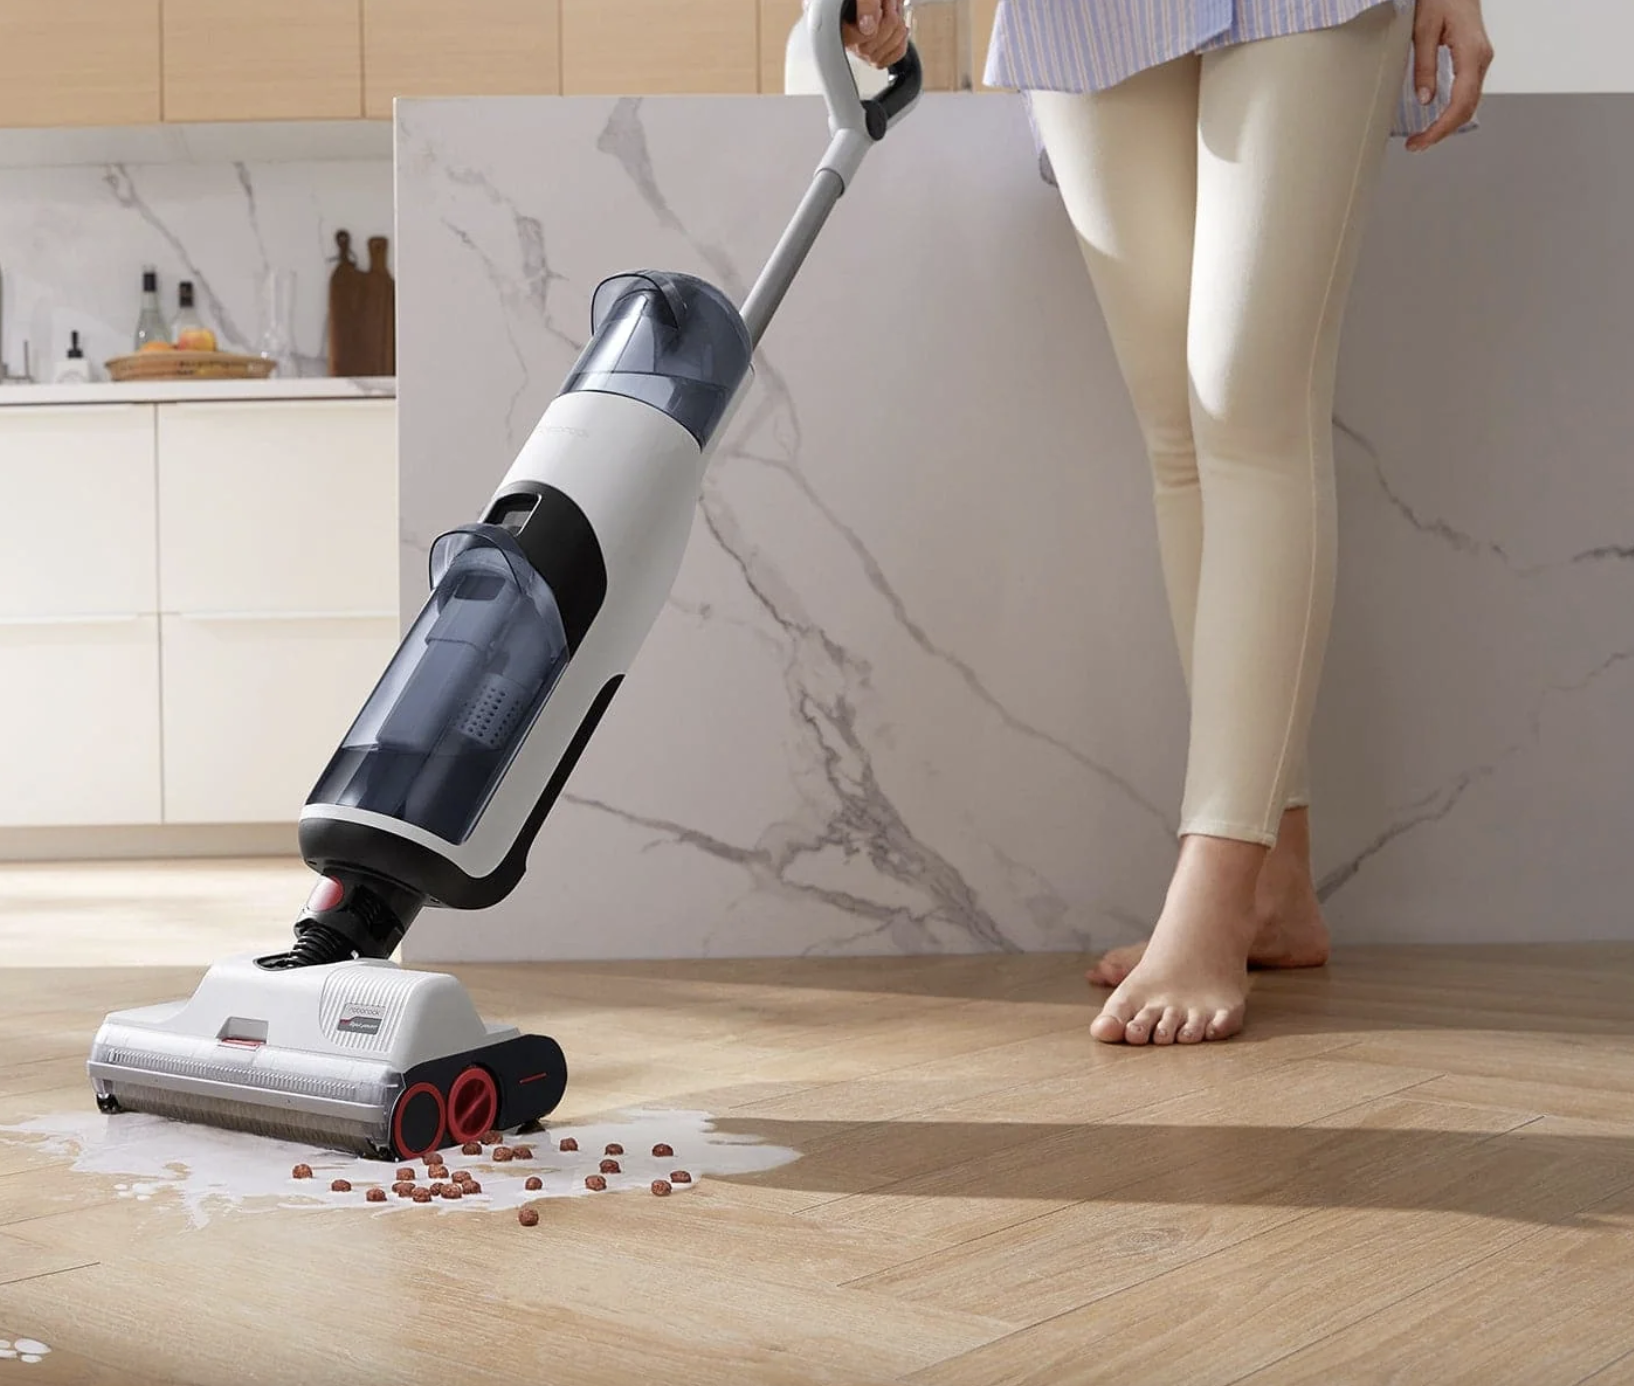 Roborock Original Dyad in Use on a Cereal Spill in a kitchen. A barefoot woman demonstrating use on a hardwood floor